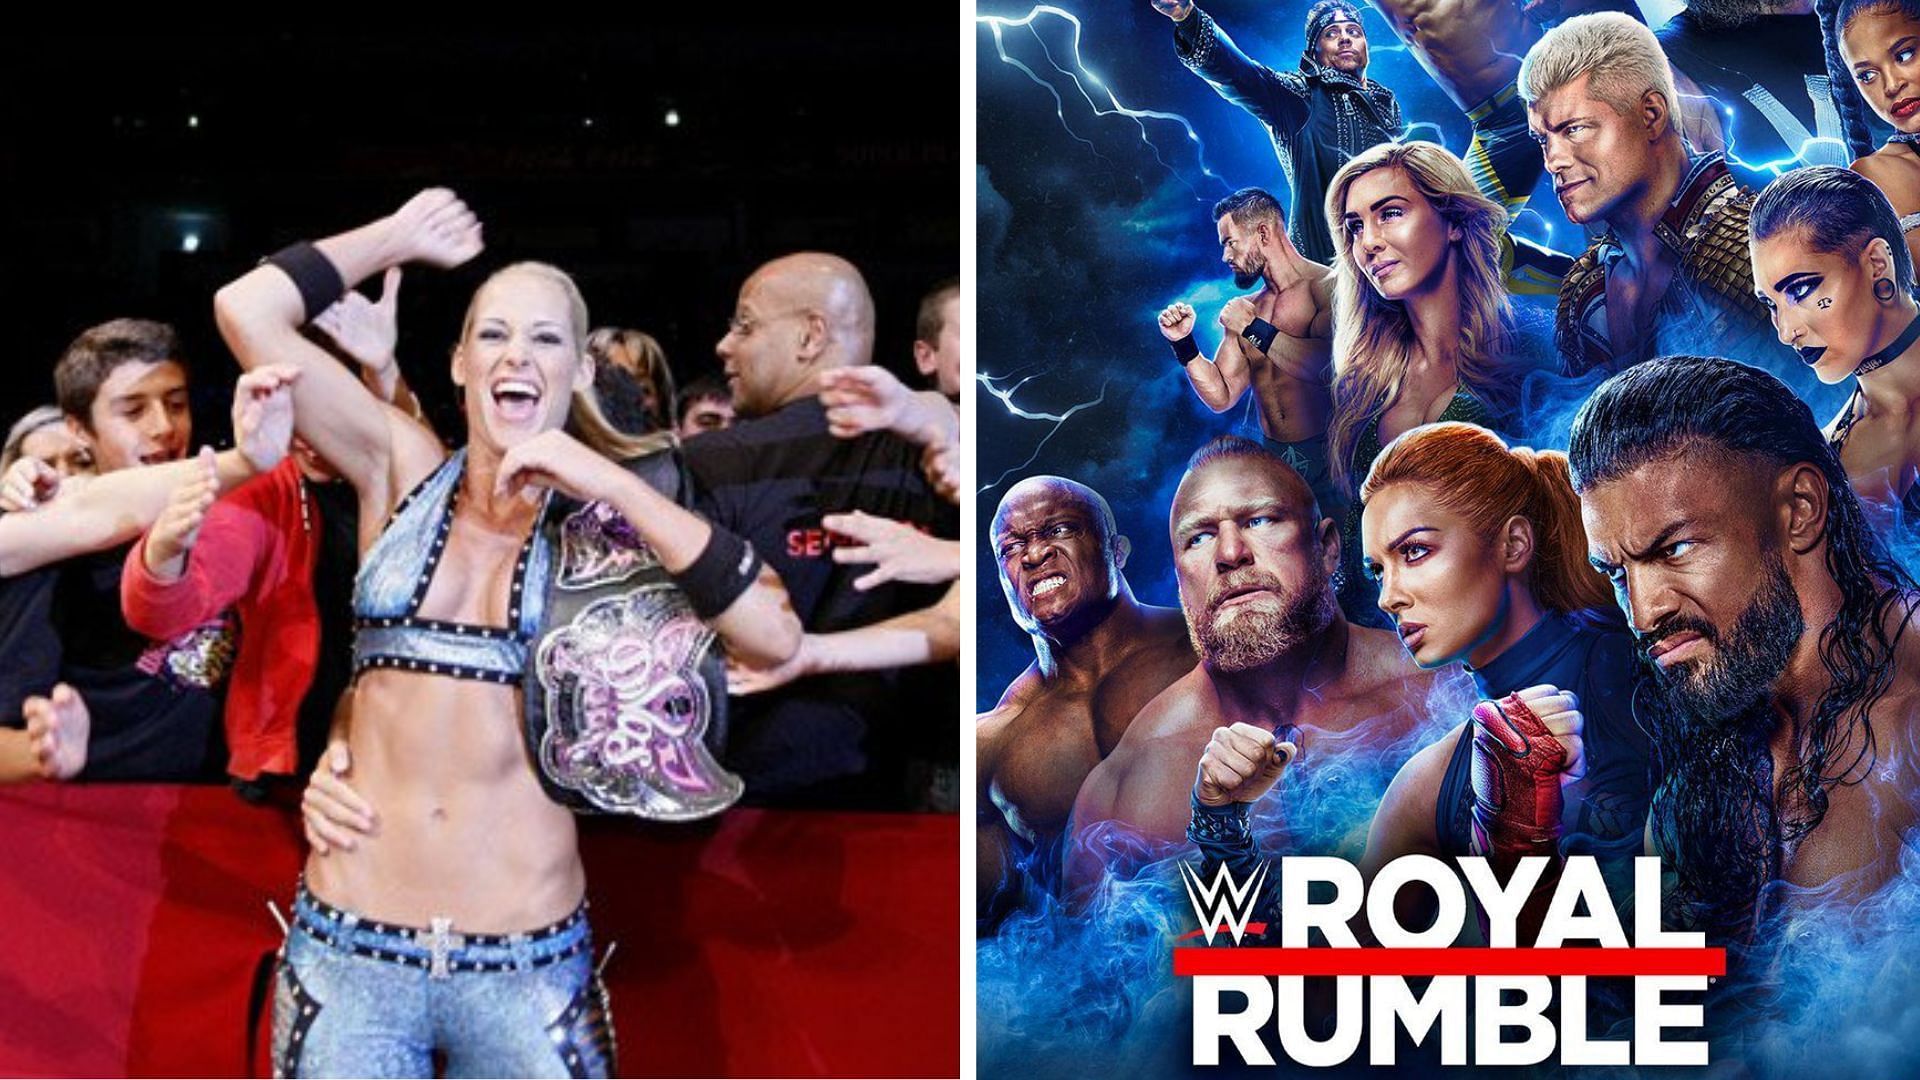 WWE Royal Rumble will air live on January 28th from San Antonio, Texas.